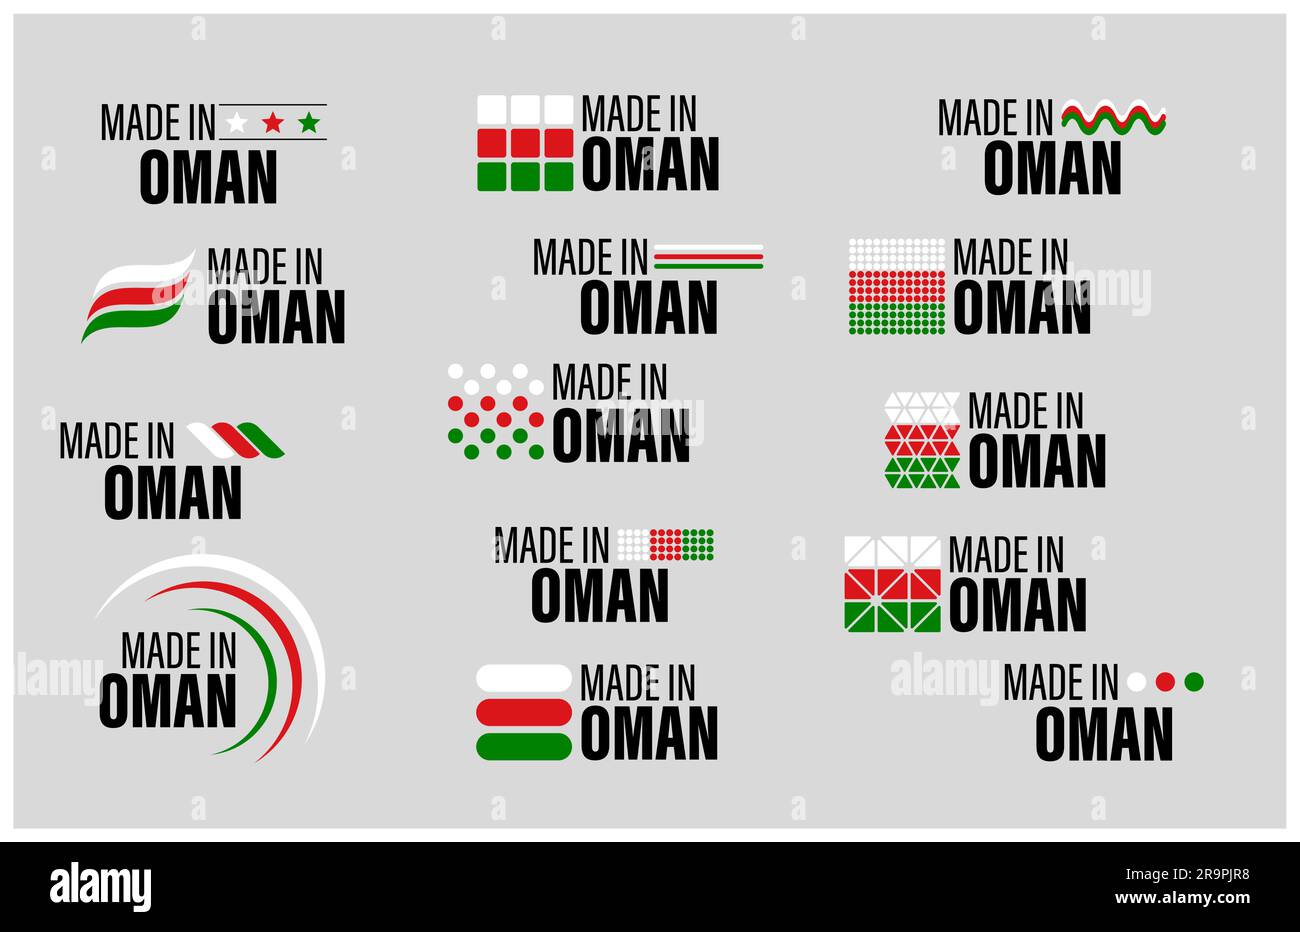 Made in Oman graphic and label set. Element of impact for the use you want to make of it. Stock Vector